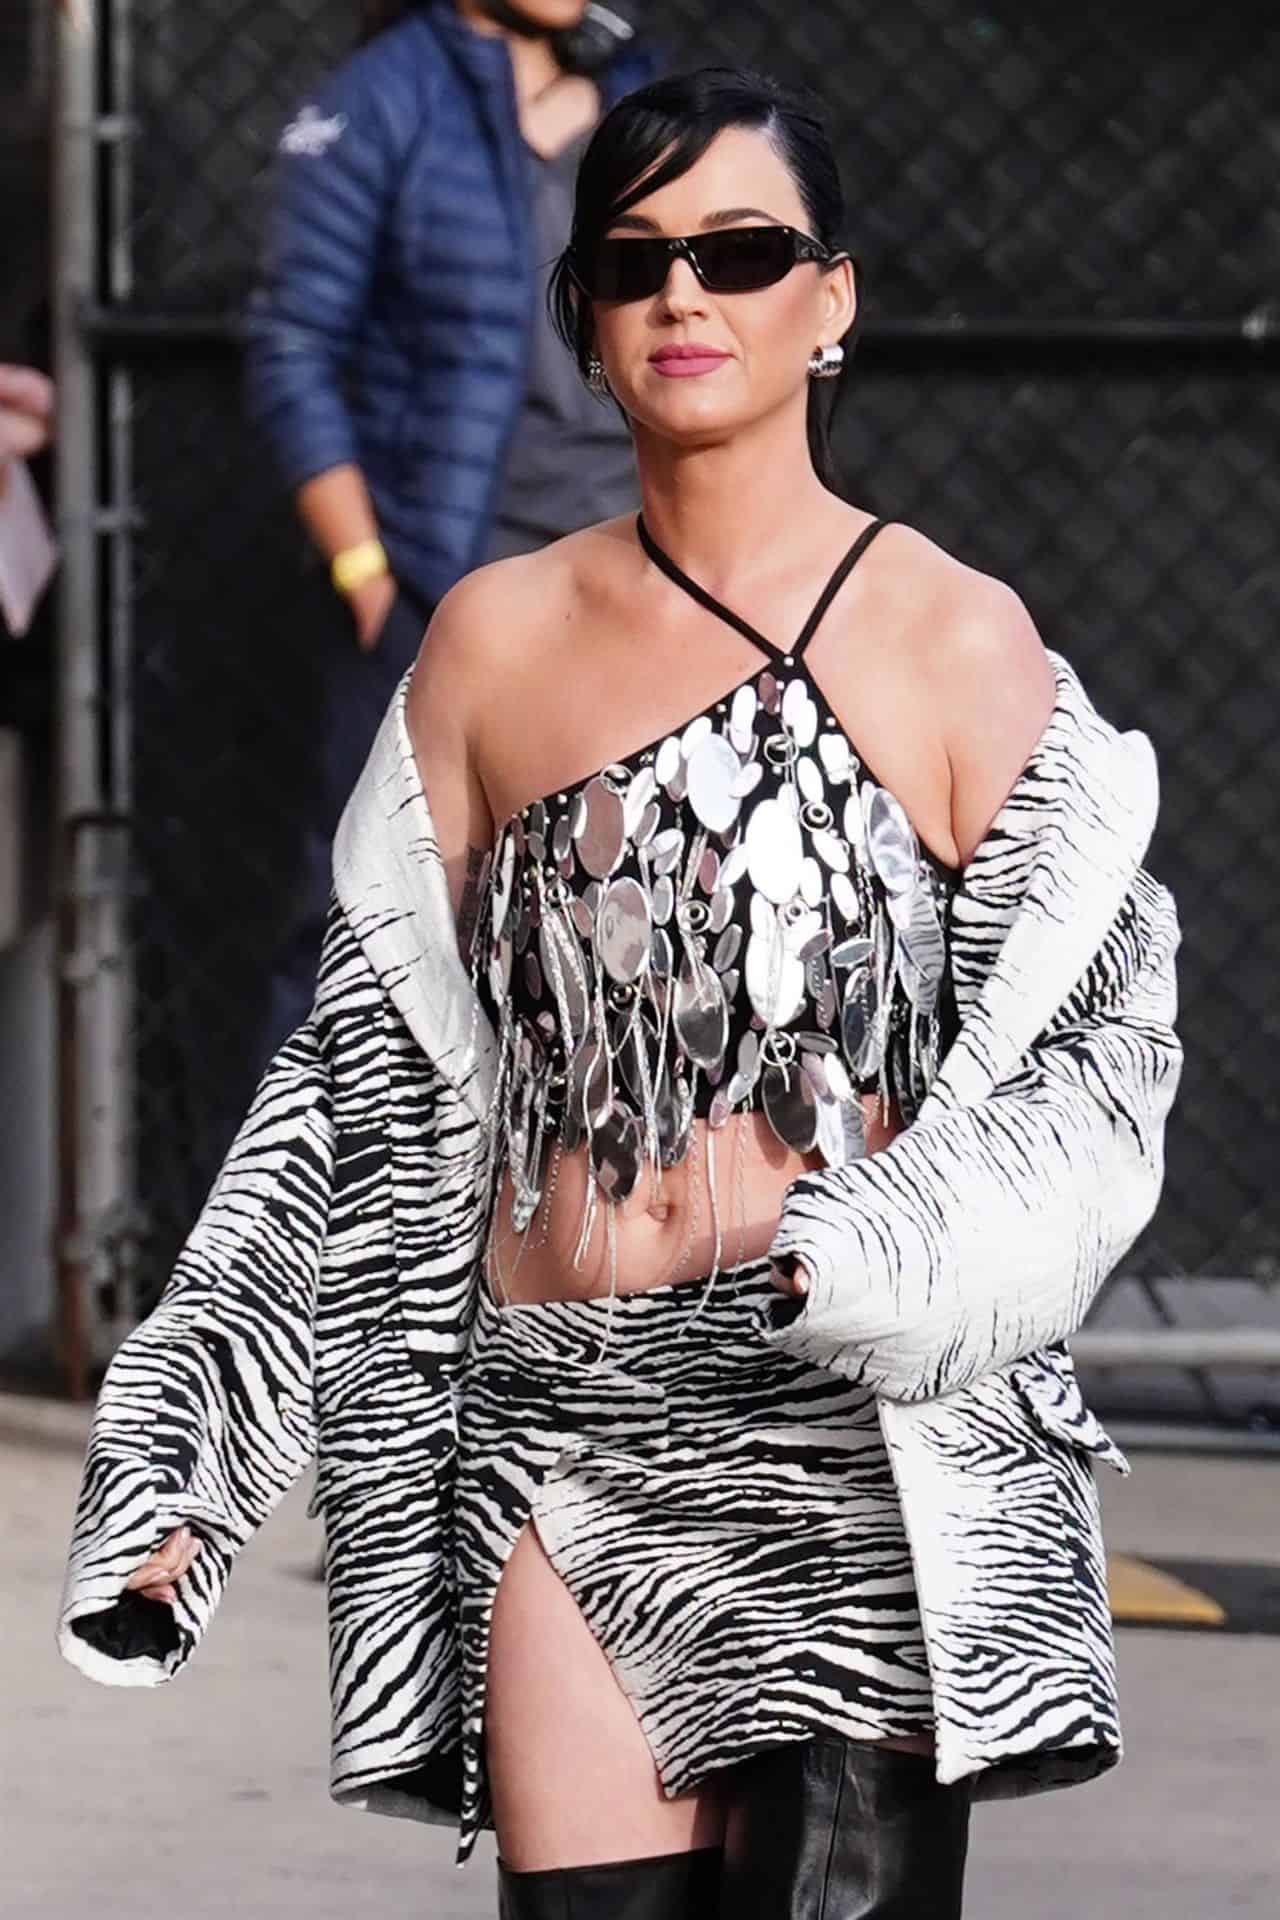 Katy Perry Shines in Sparkling Crop Top at Jimmy Kimmel Live Studio